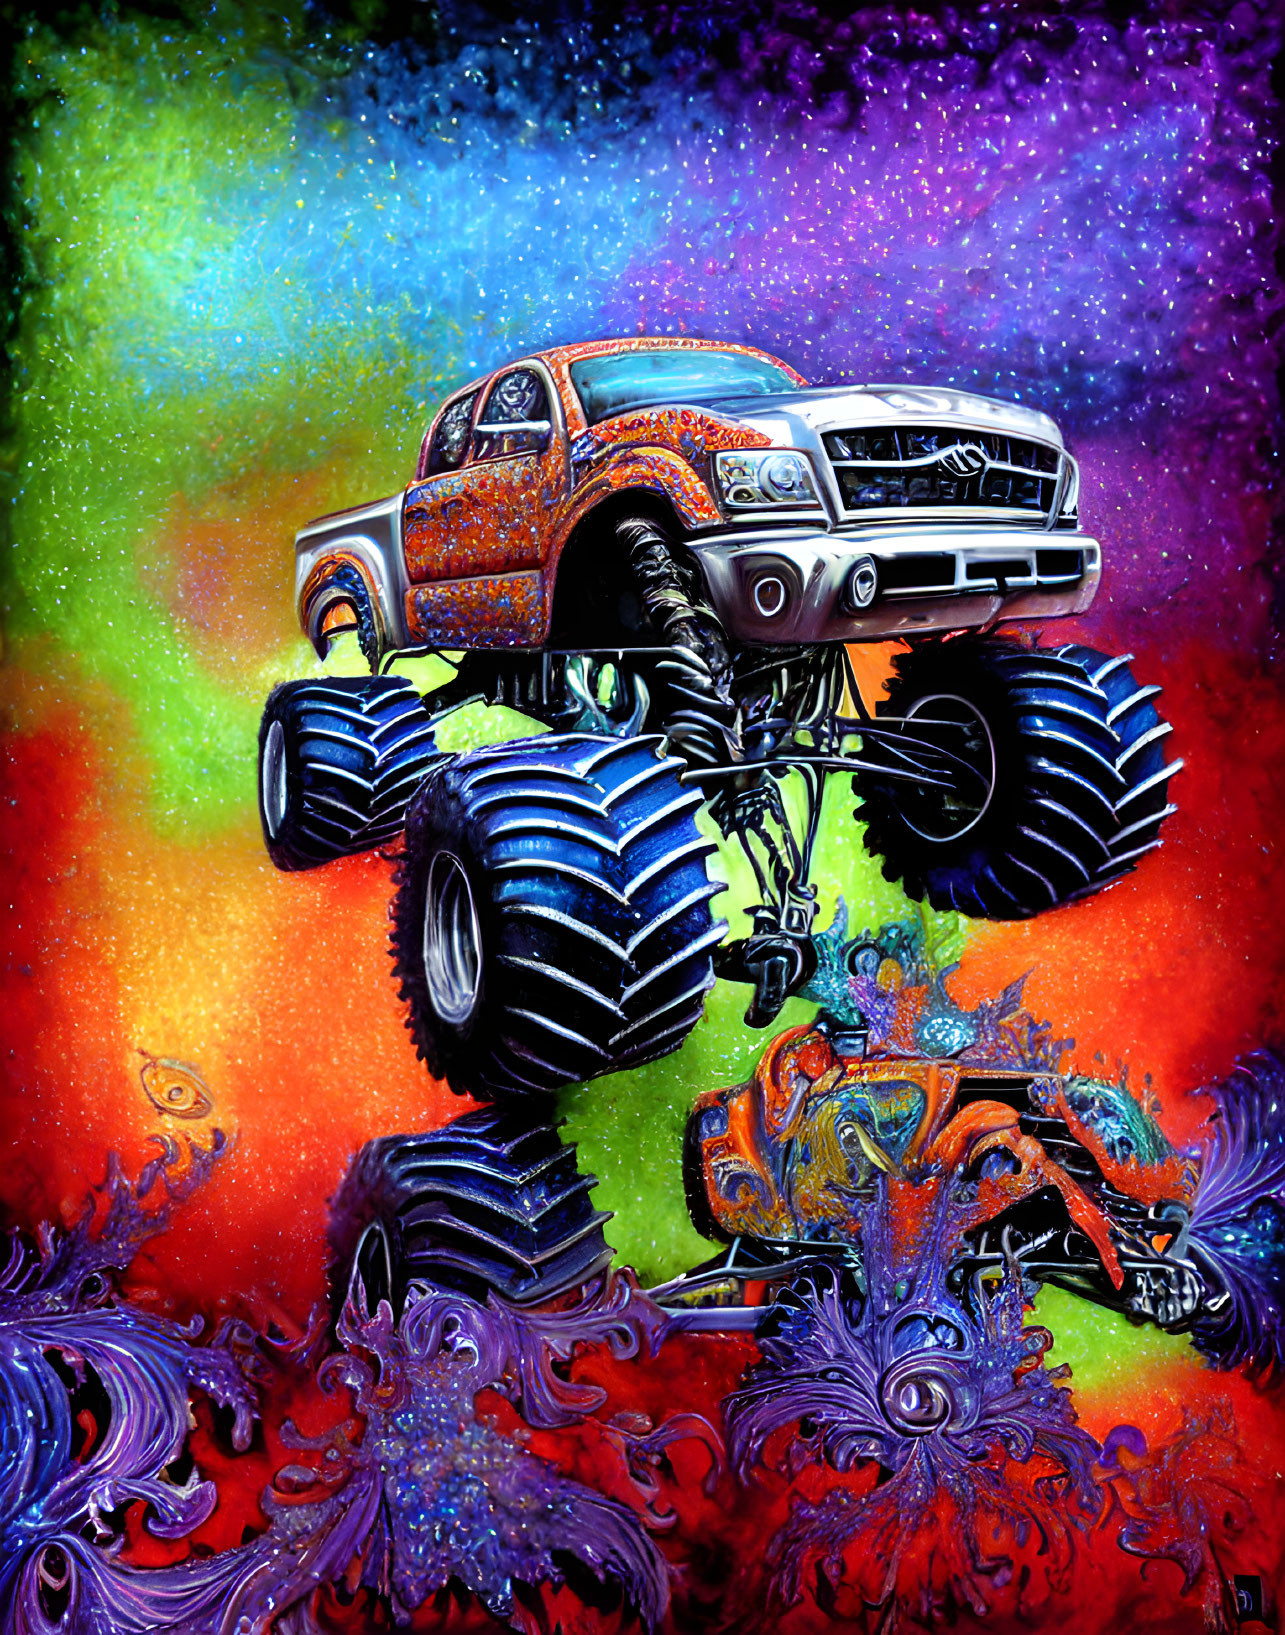 Colorful Monster Truck Artwork with Psychedelic Patterns